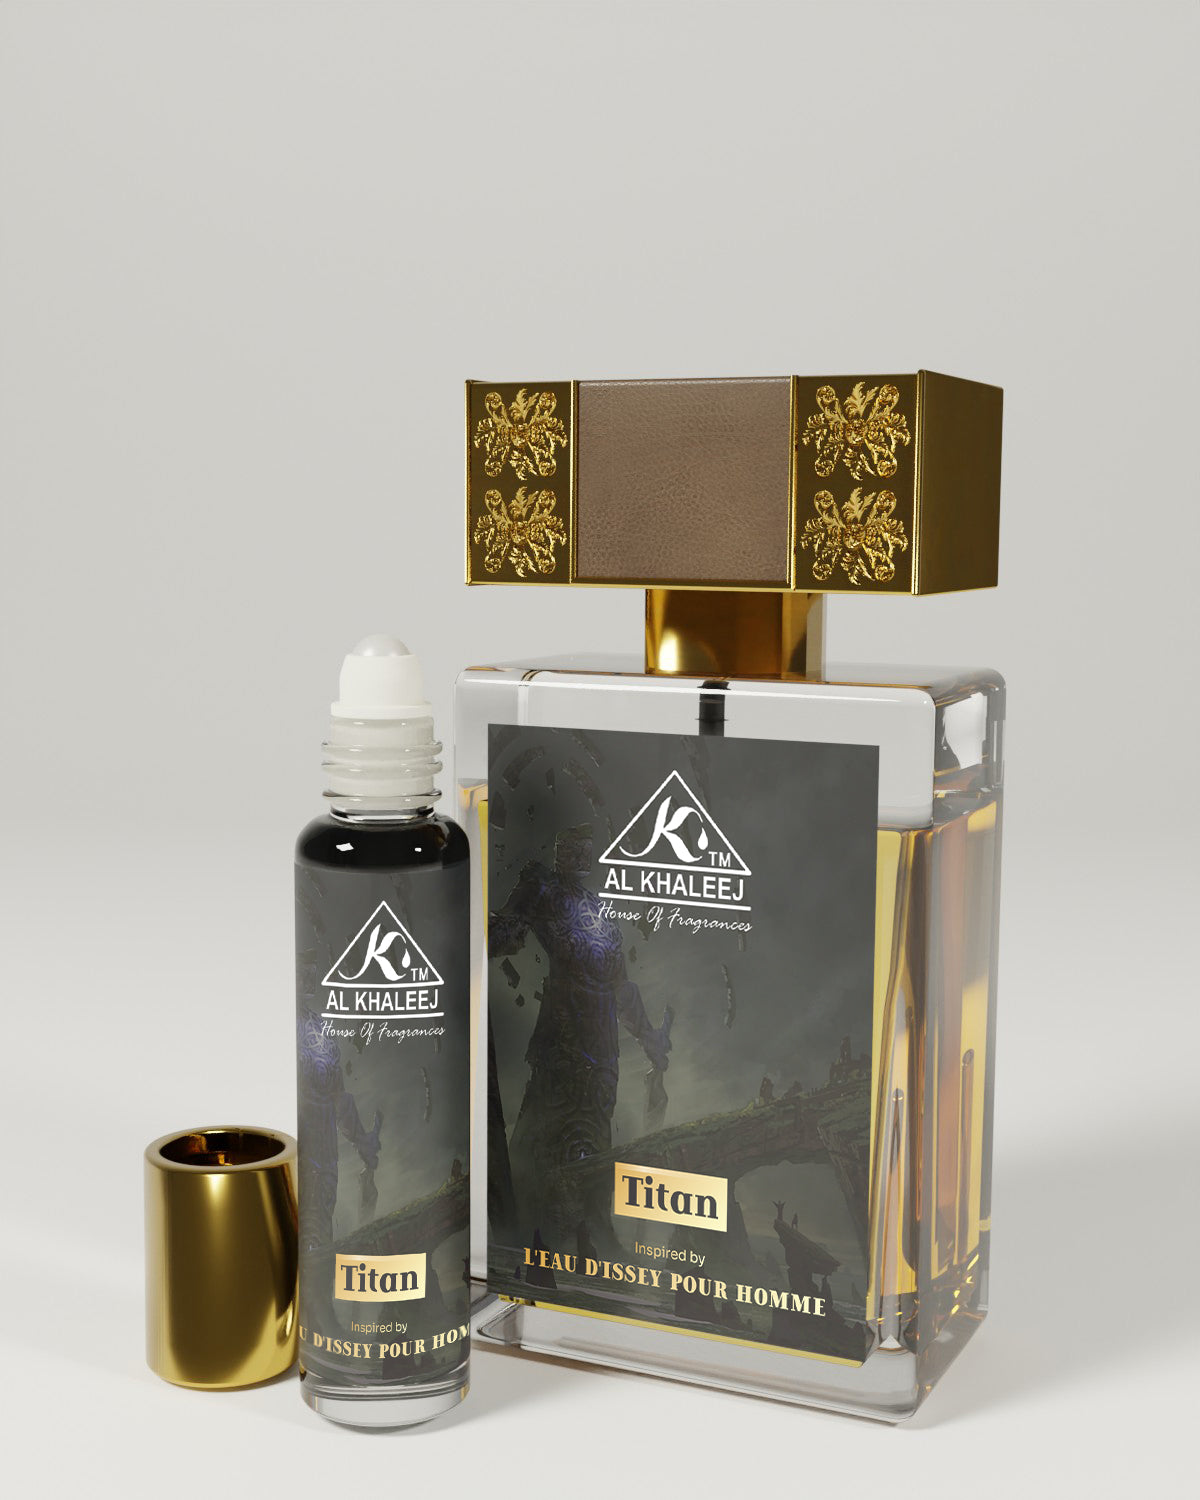 Titan Inspired By L'Eau d'Issey Miyanke Pour Homme